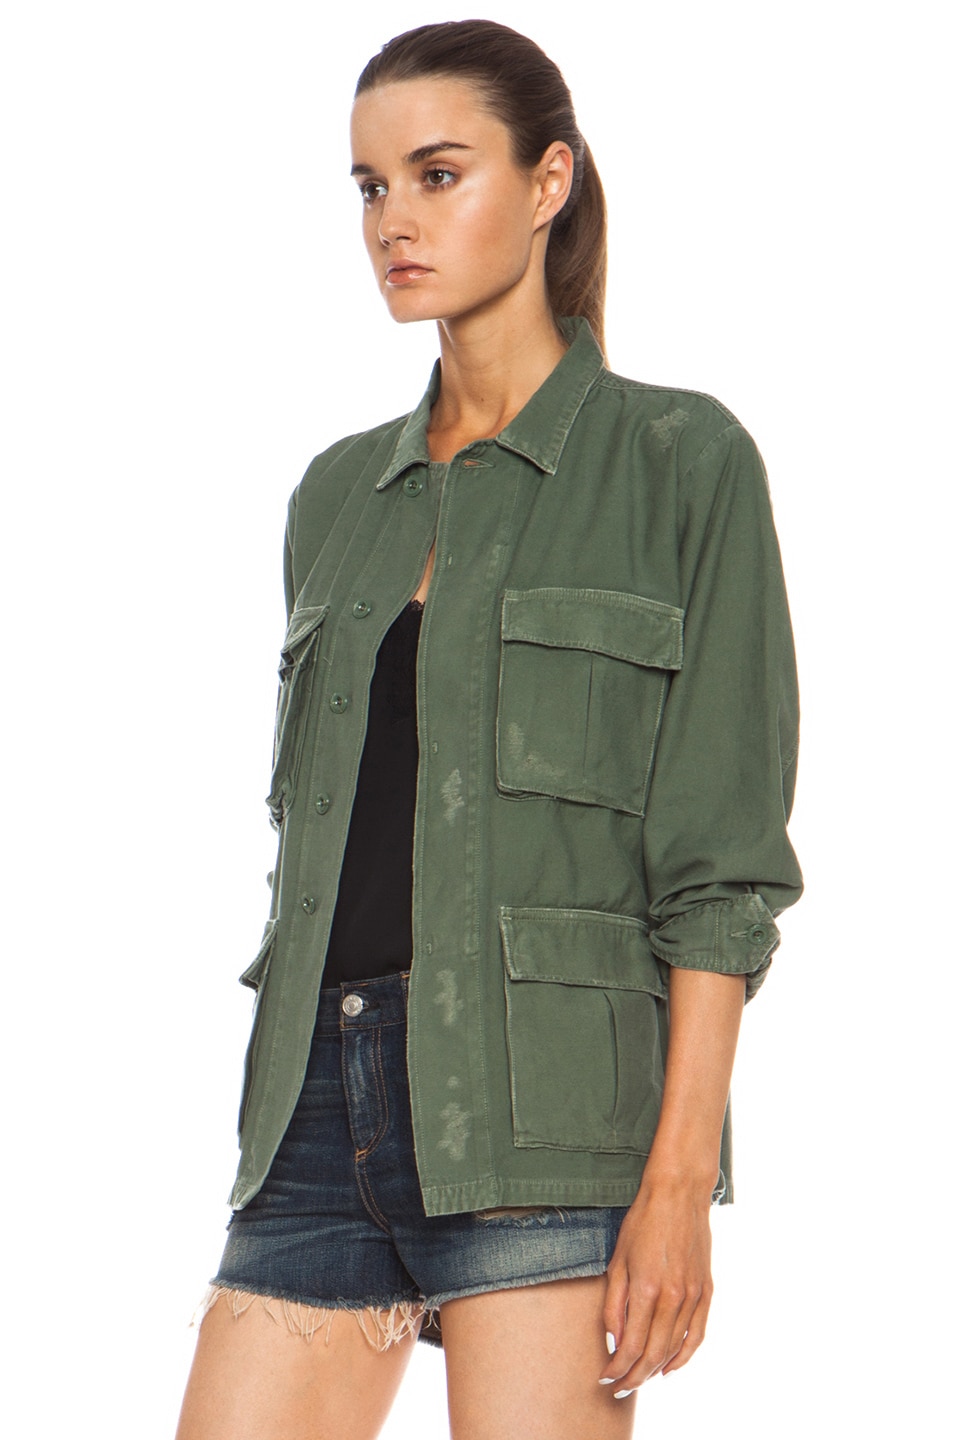 Citizens of Humanity Kyle Military Jacket in Fatigue | FWRD